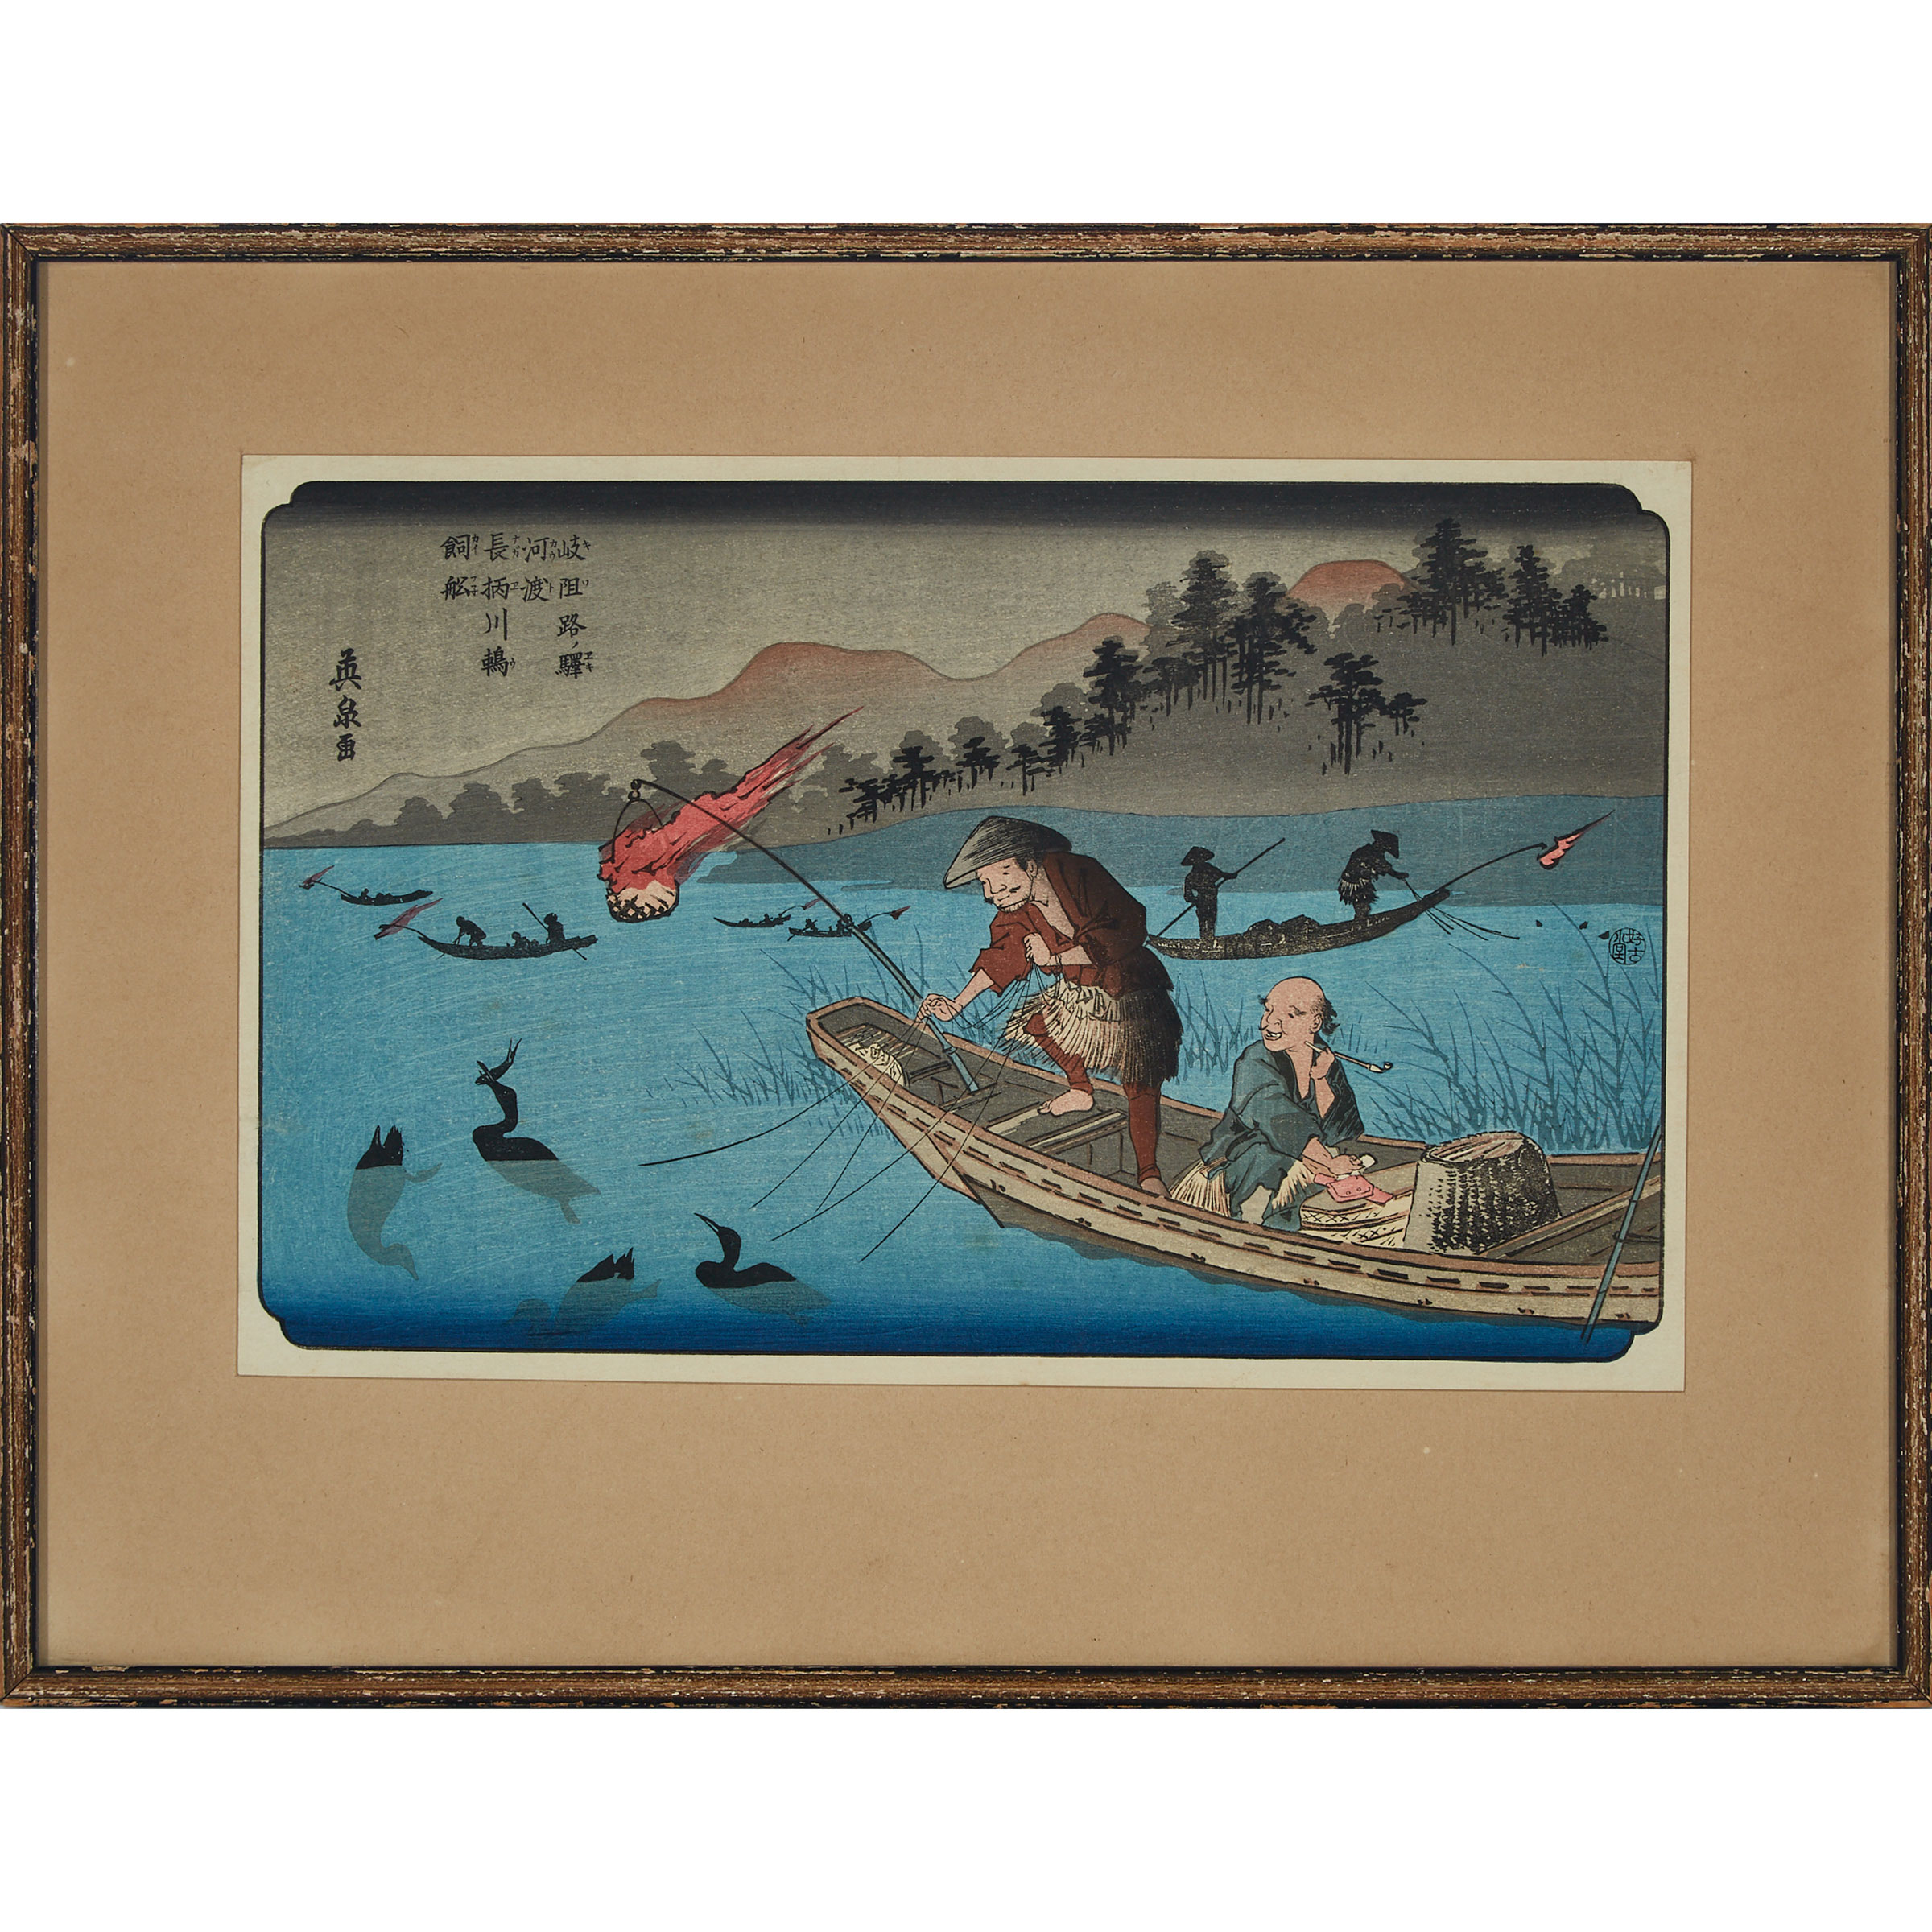 A Group of Four Framed Ukiyo-e Landscape Woodblocks, Early 20th Century